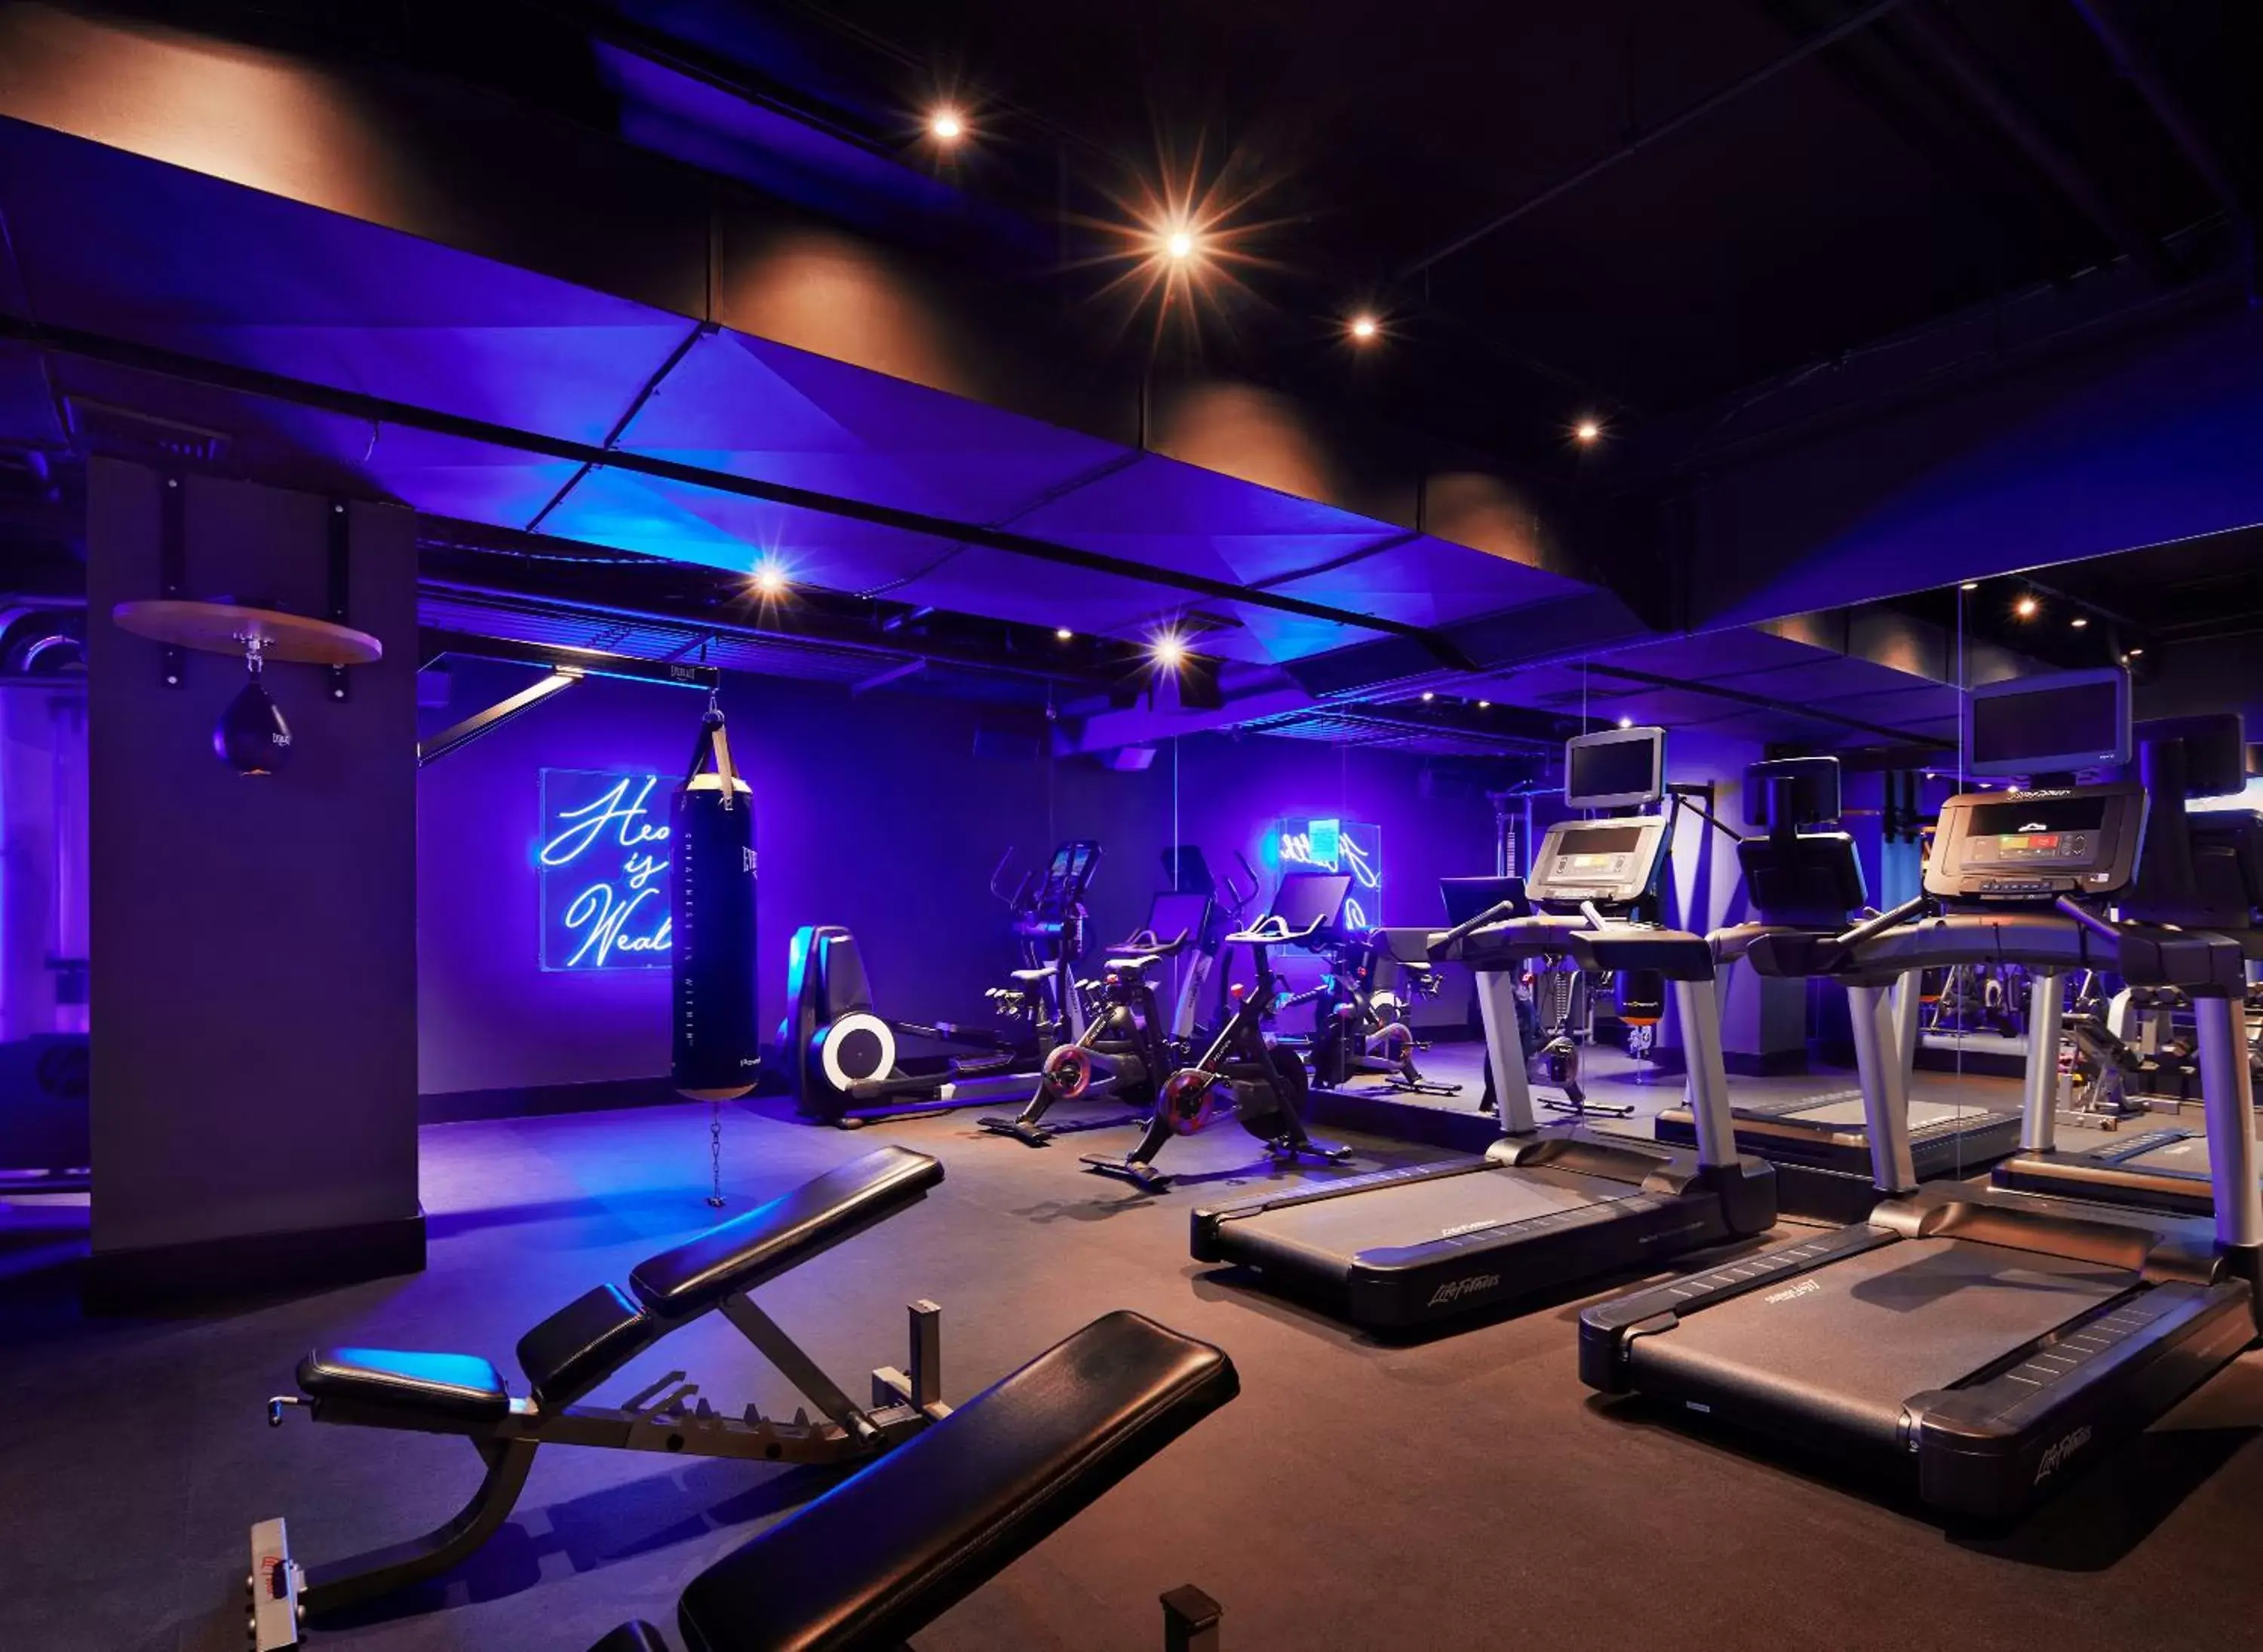 Fitness centre/facilities, Fitness Center/Facilities in Gansevoort Meatpacking